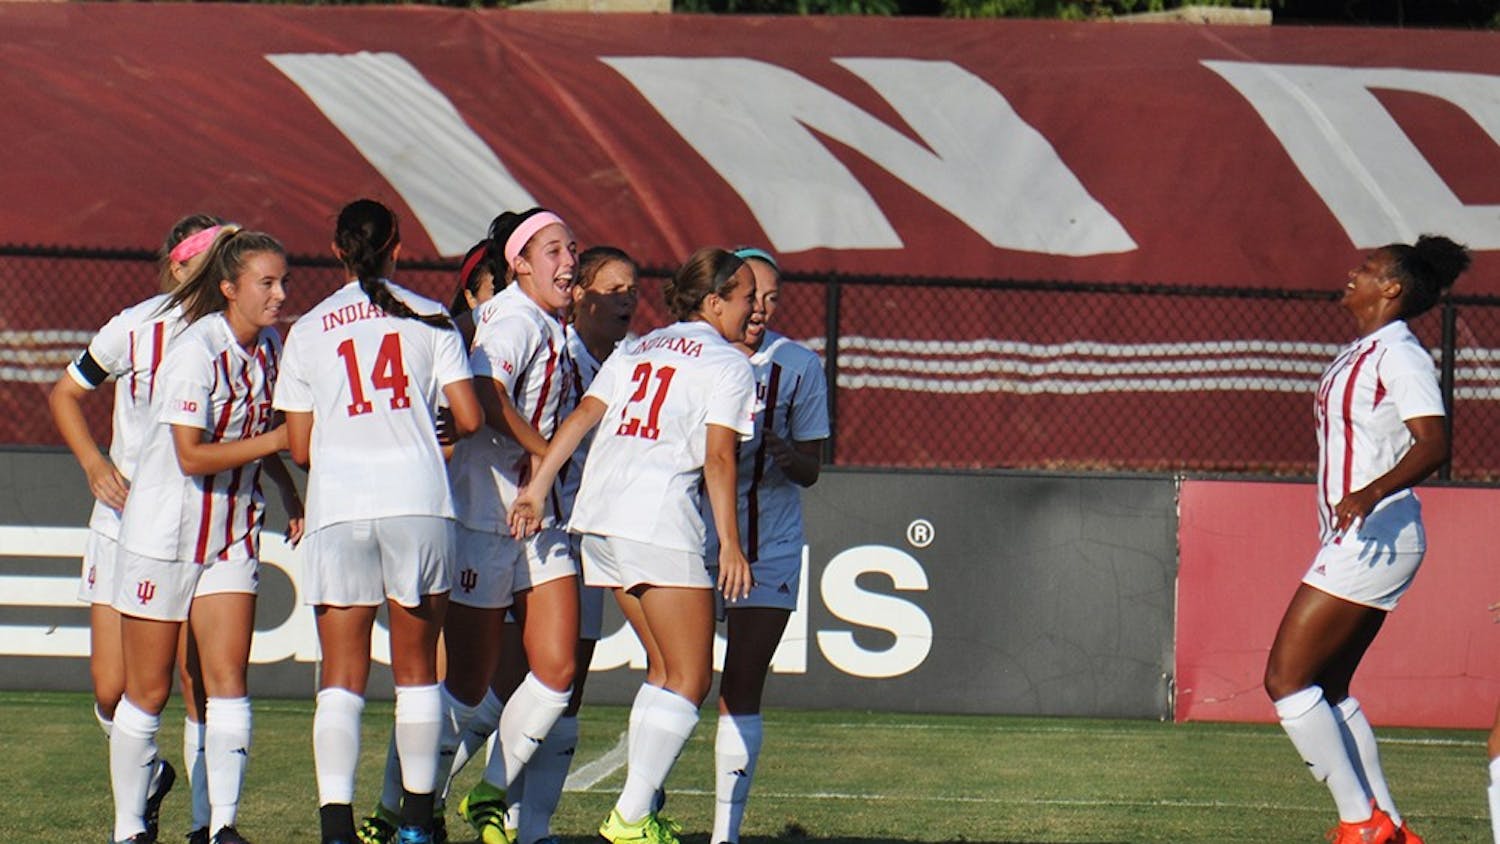 The IU women's soccer team celebrate an early goal in their season-opening game against Louisville on Sept. 24 at Bill Armstrong Stadium.